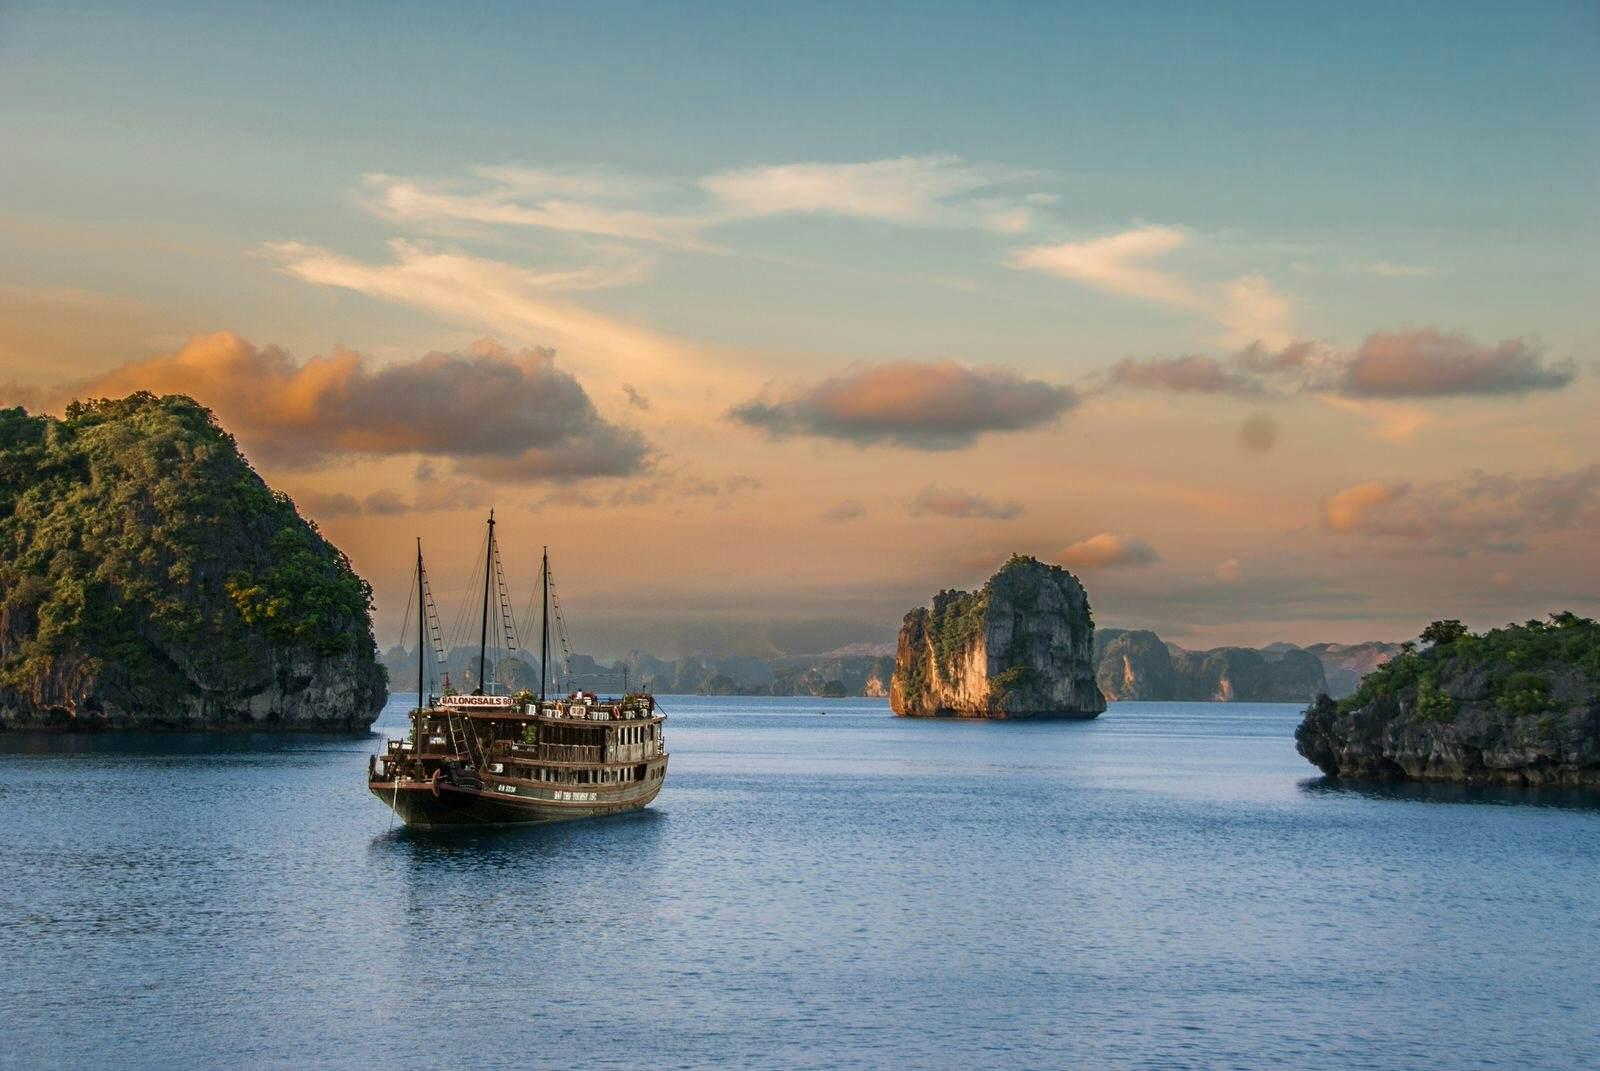 A traditional boat sails on the waters of Halong Bay, with limestone pillars protruding from the water surrounding it